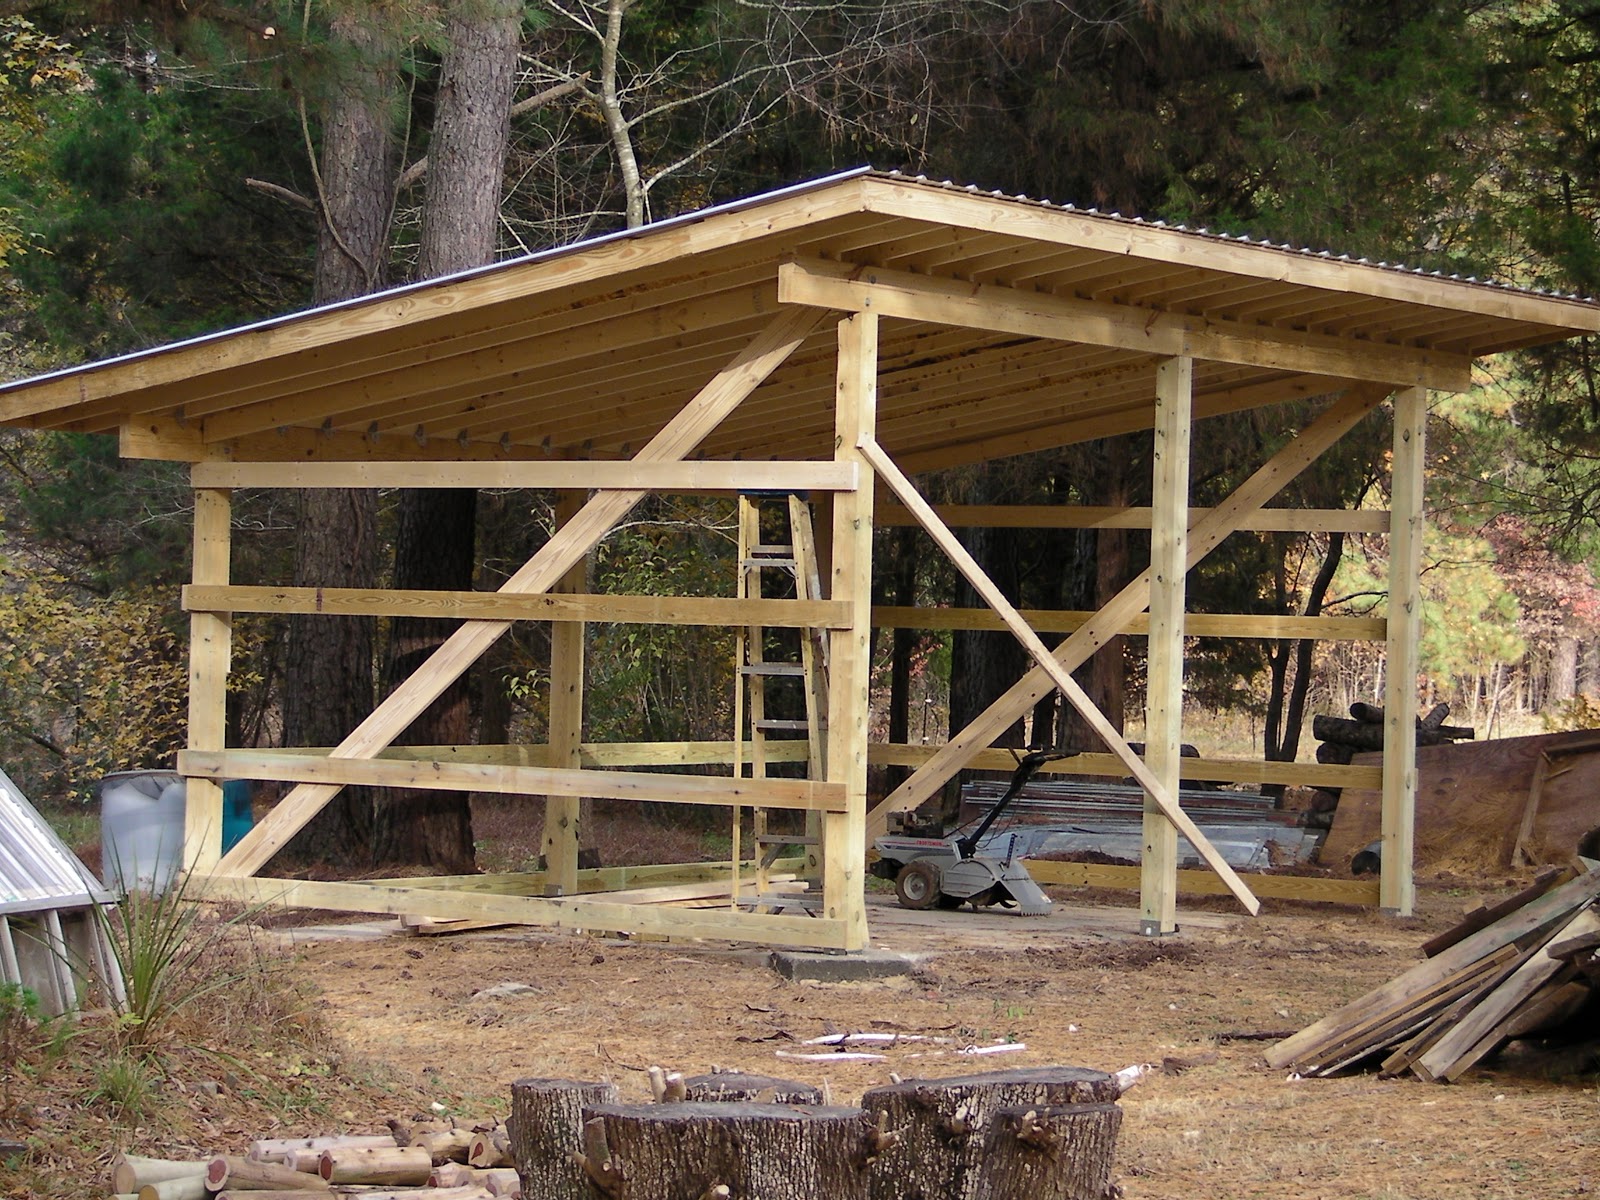 Emerson Farm: New Shed and Flow Form